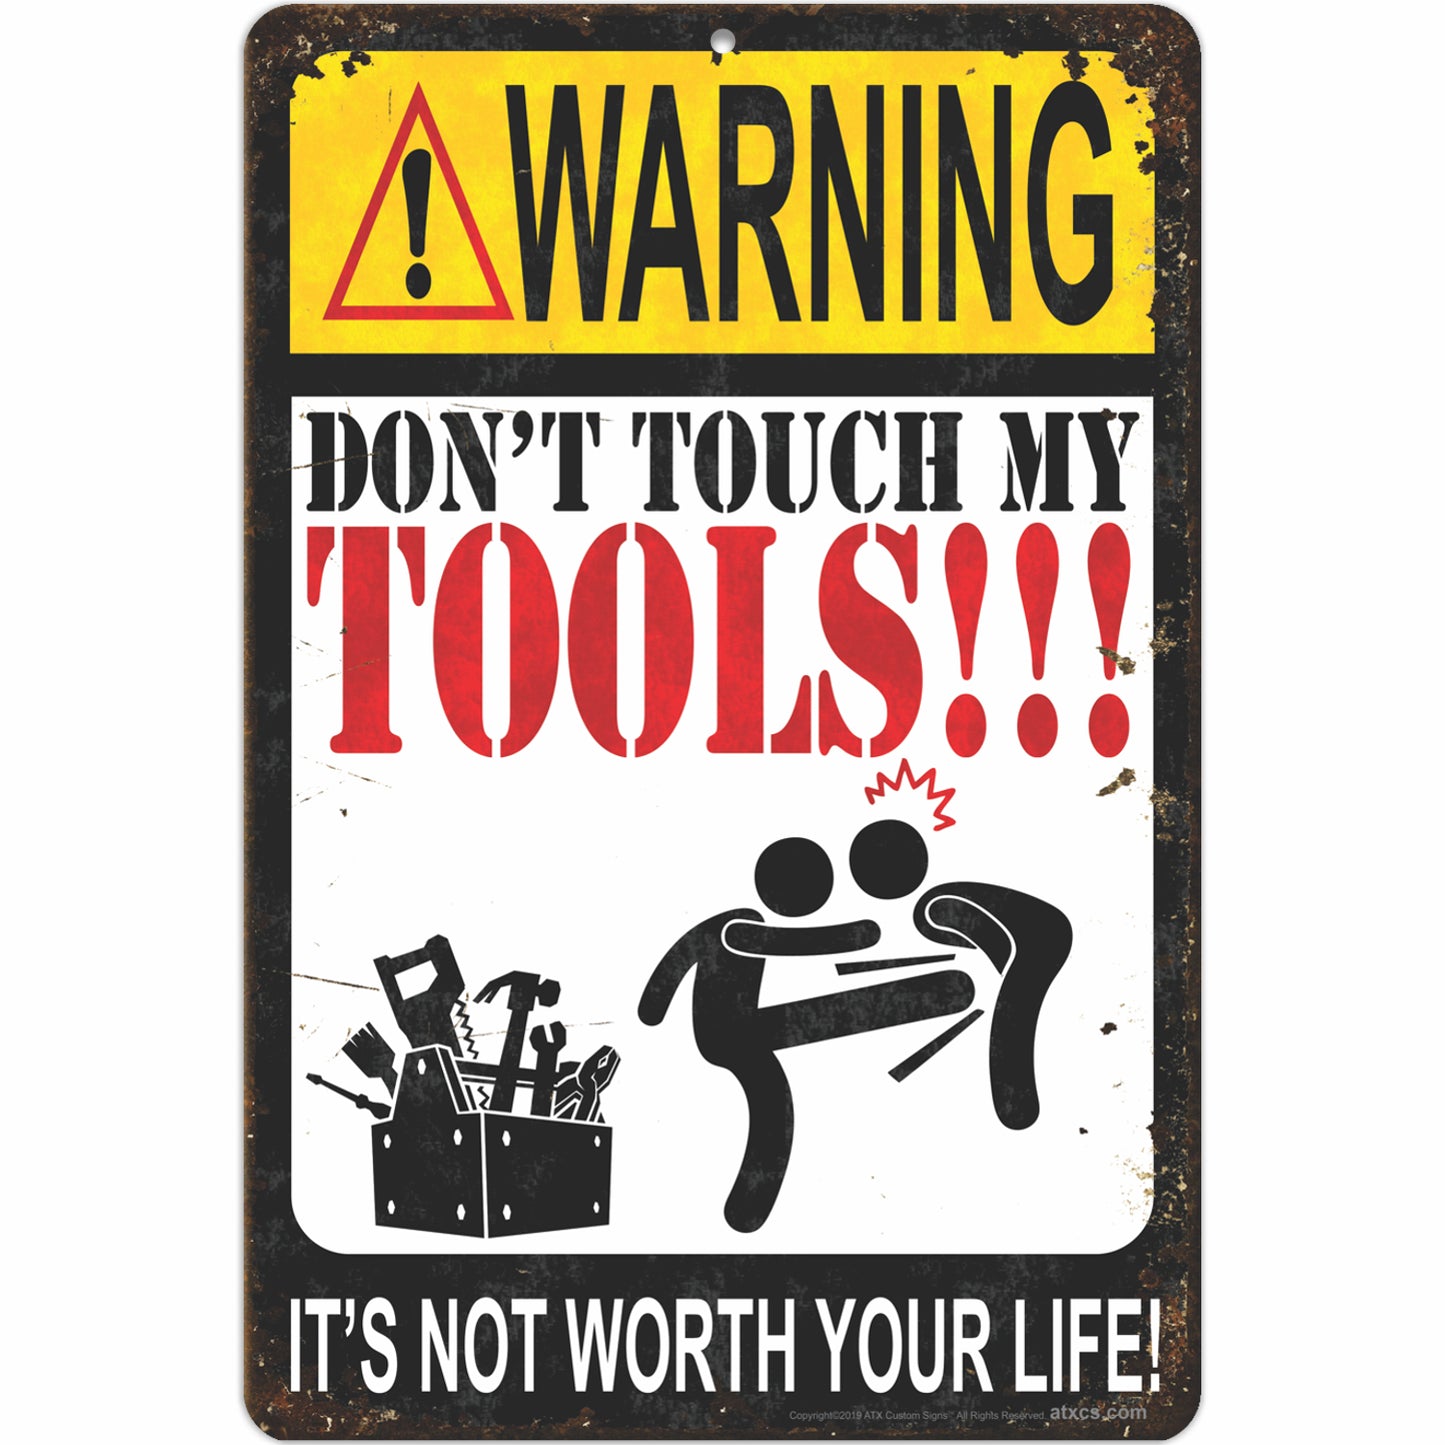 Warning Don't Touch My Tools!!! It's not Worth Your Life! (Antique Looking)